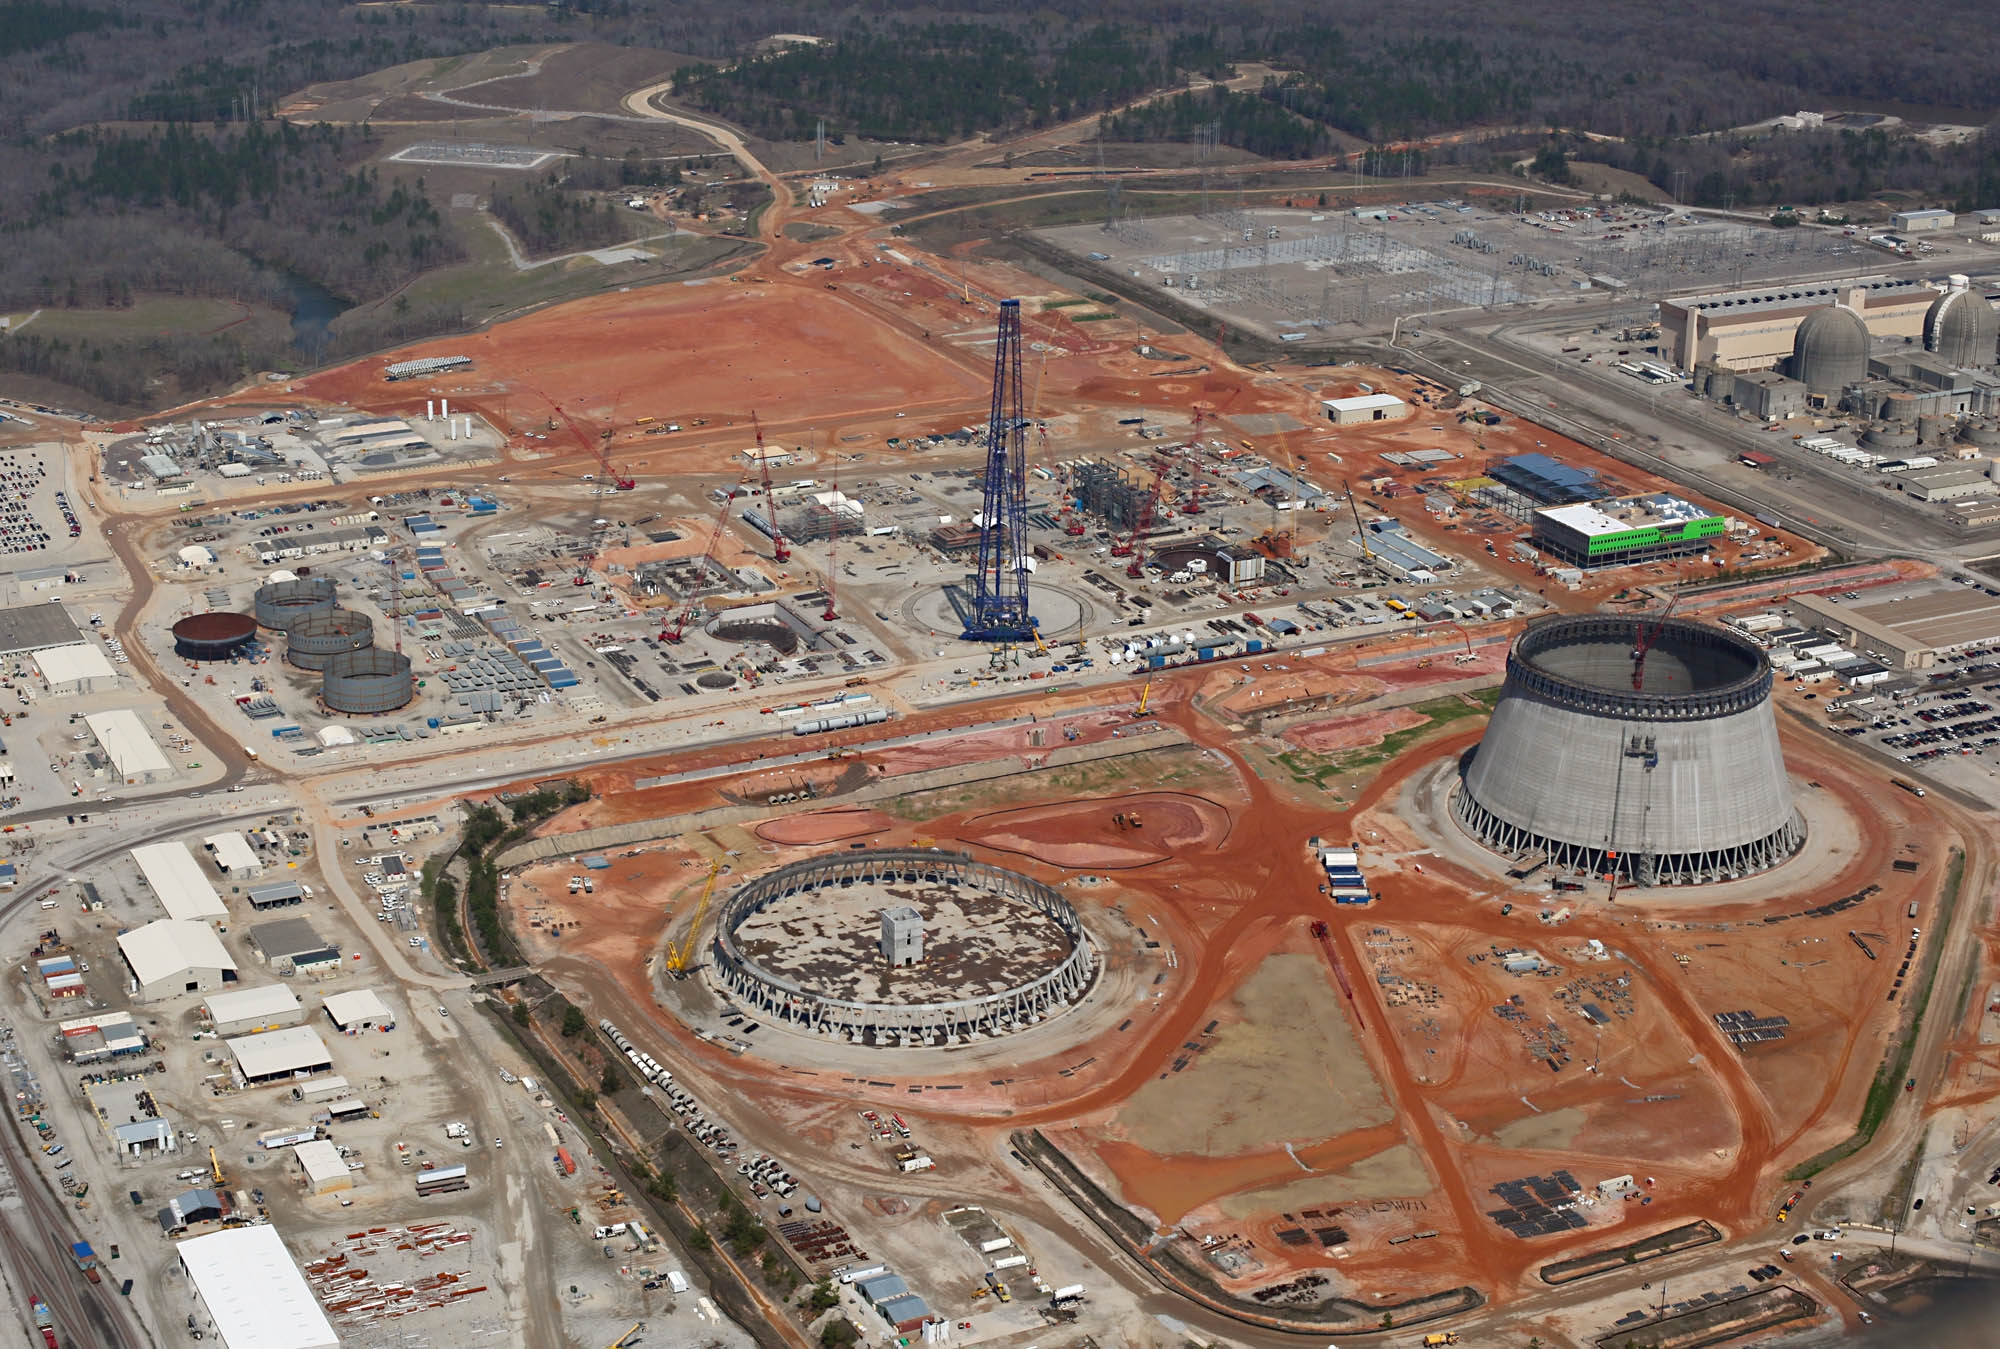 It's a race to the bottom: which reactor will come online first? Vogtle (pictured here in March 2014) or Flamanville (pictured below). Or, alternatively, which project will be abandoned first?